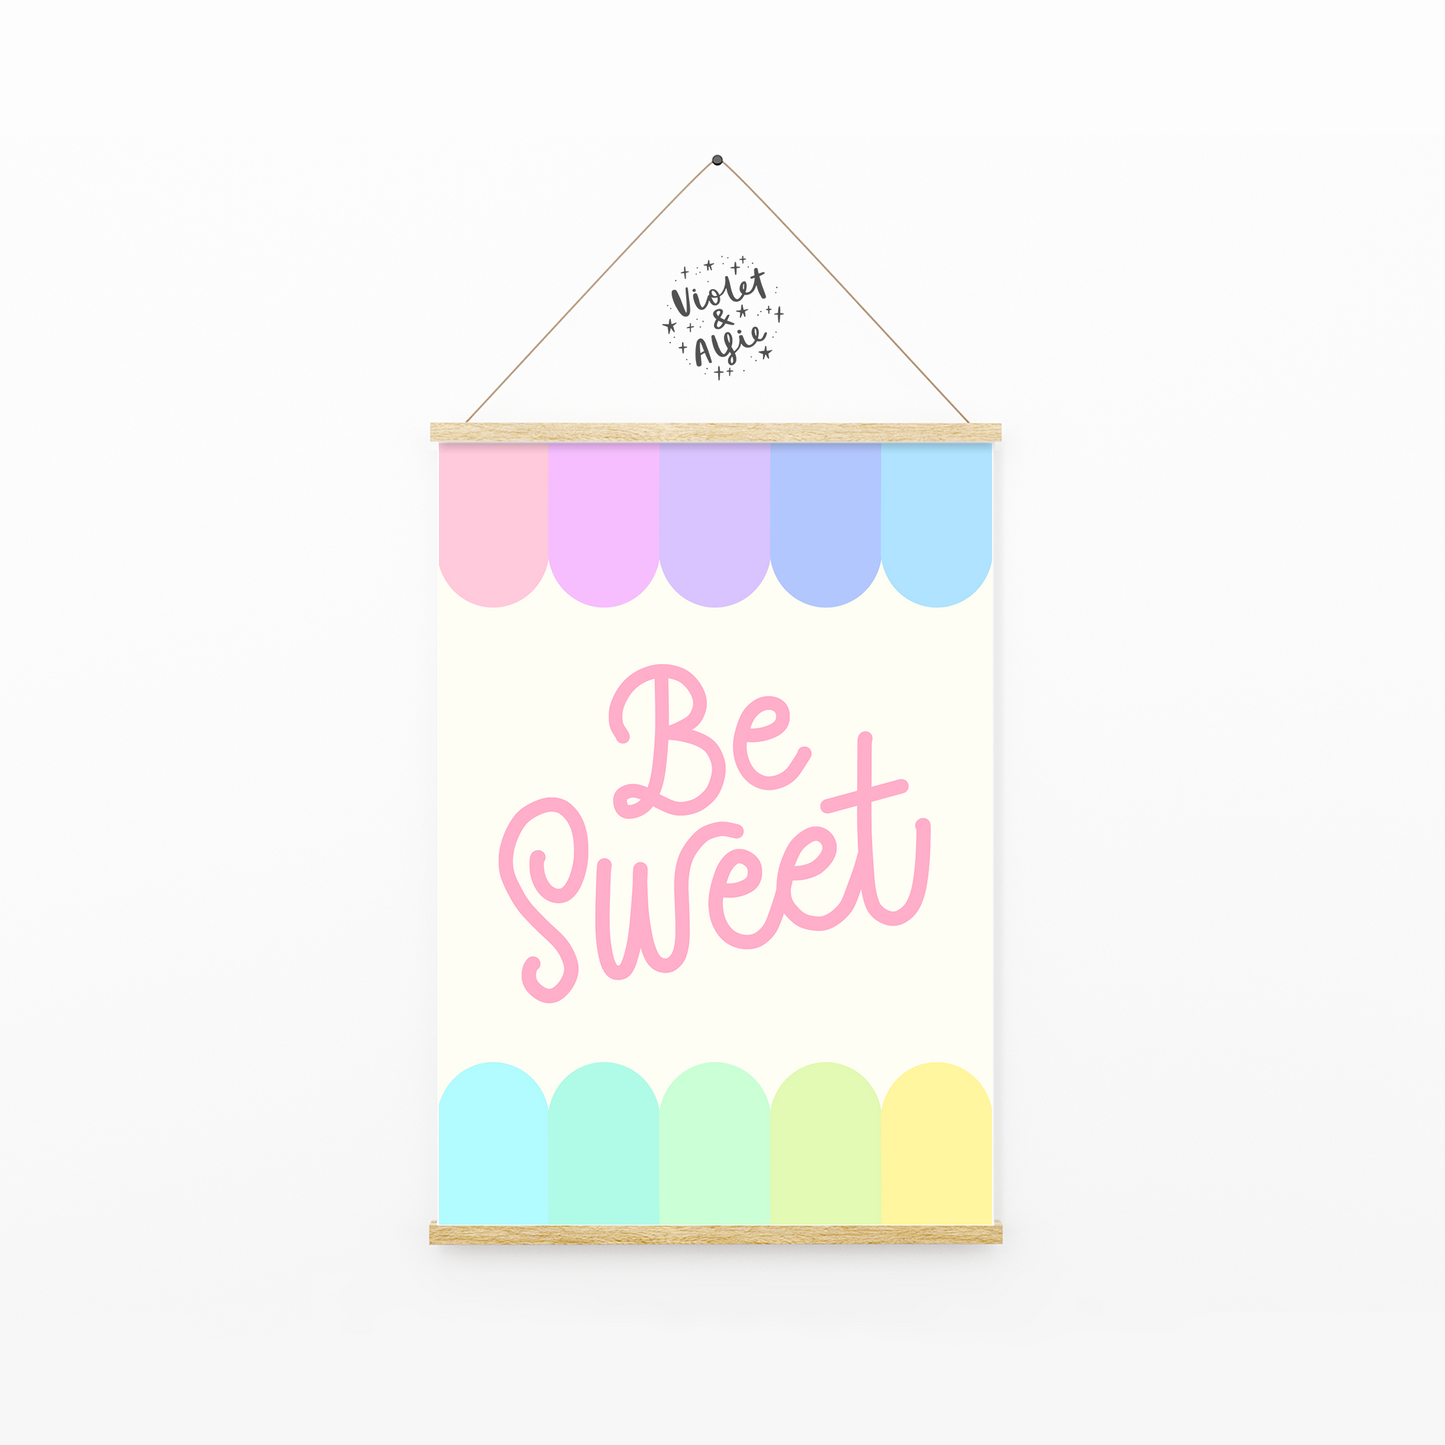 Be Sweet Typographic Print, Rainbow Pastel Wall Art, Child's bedroom wall decor, prints for young girl's bedroom, pastel decor, baby girl nursery wall art prints uk